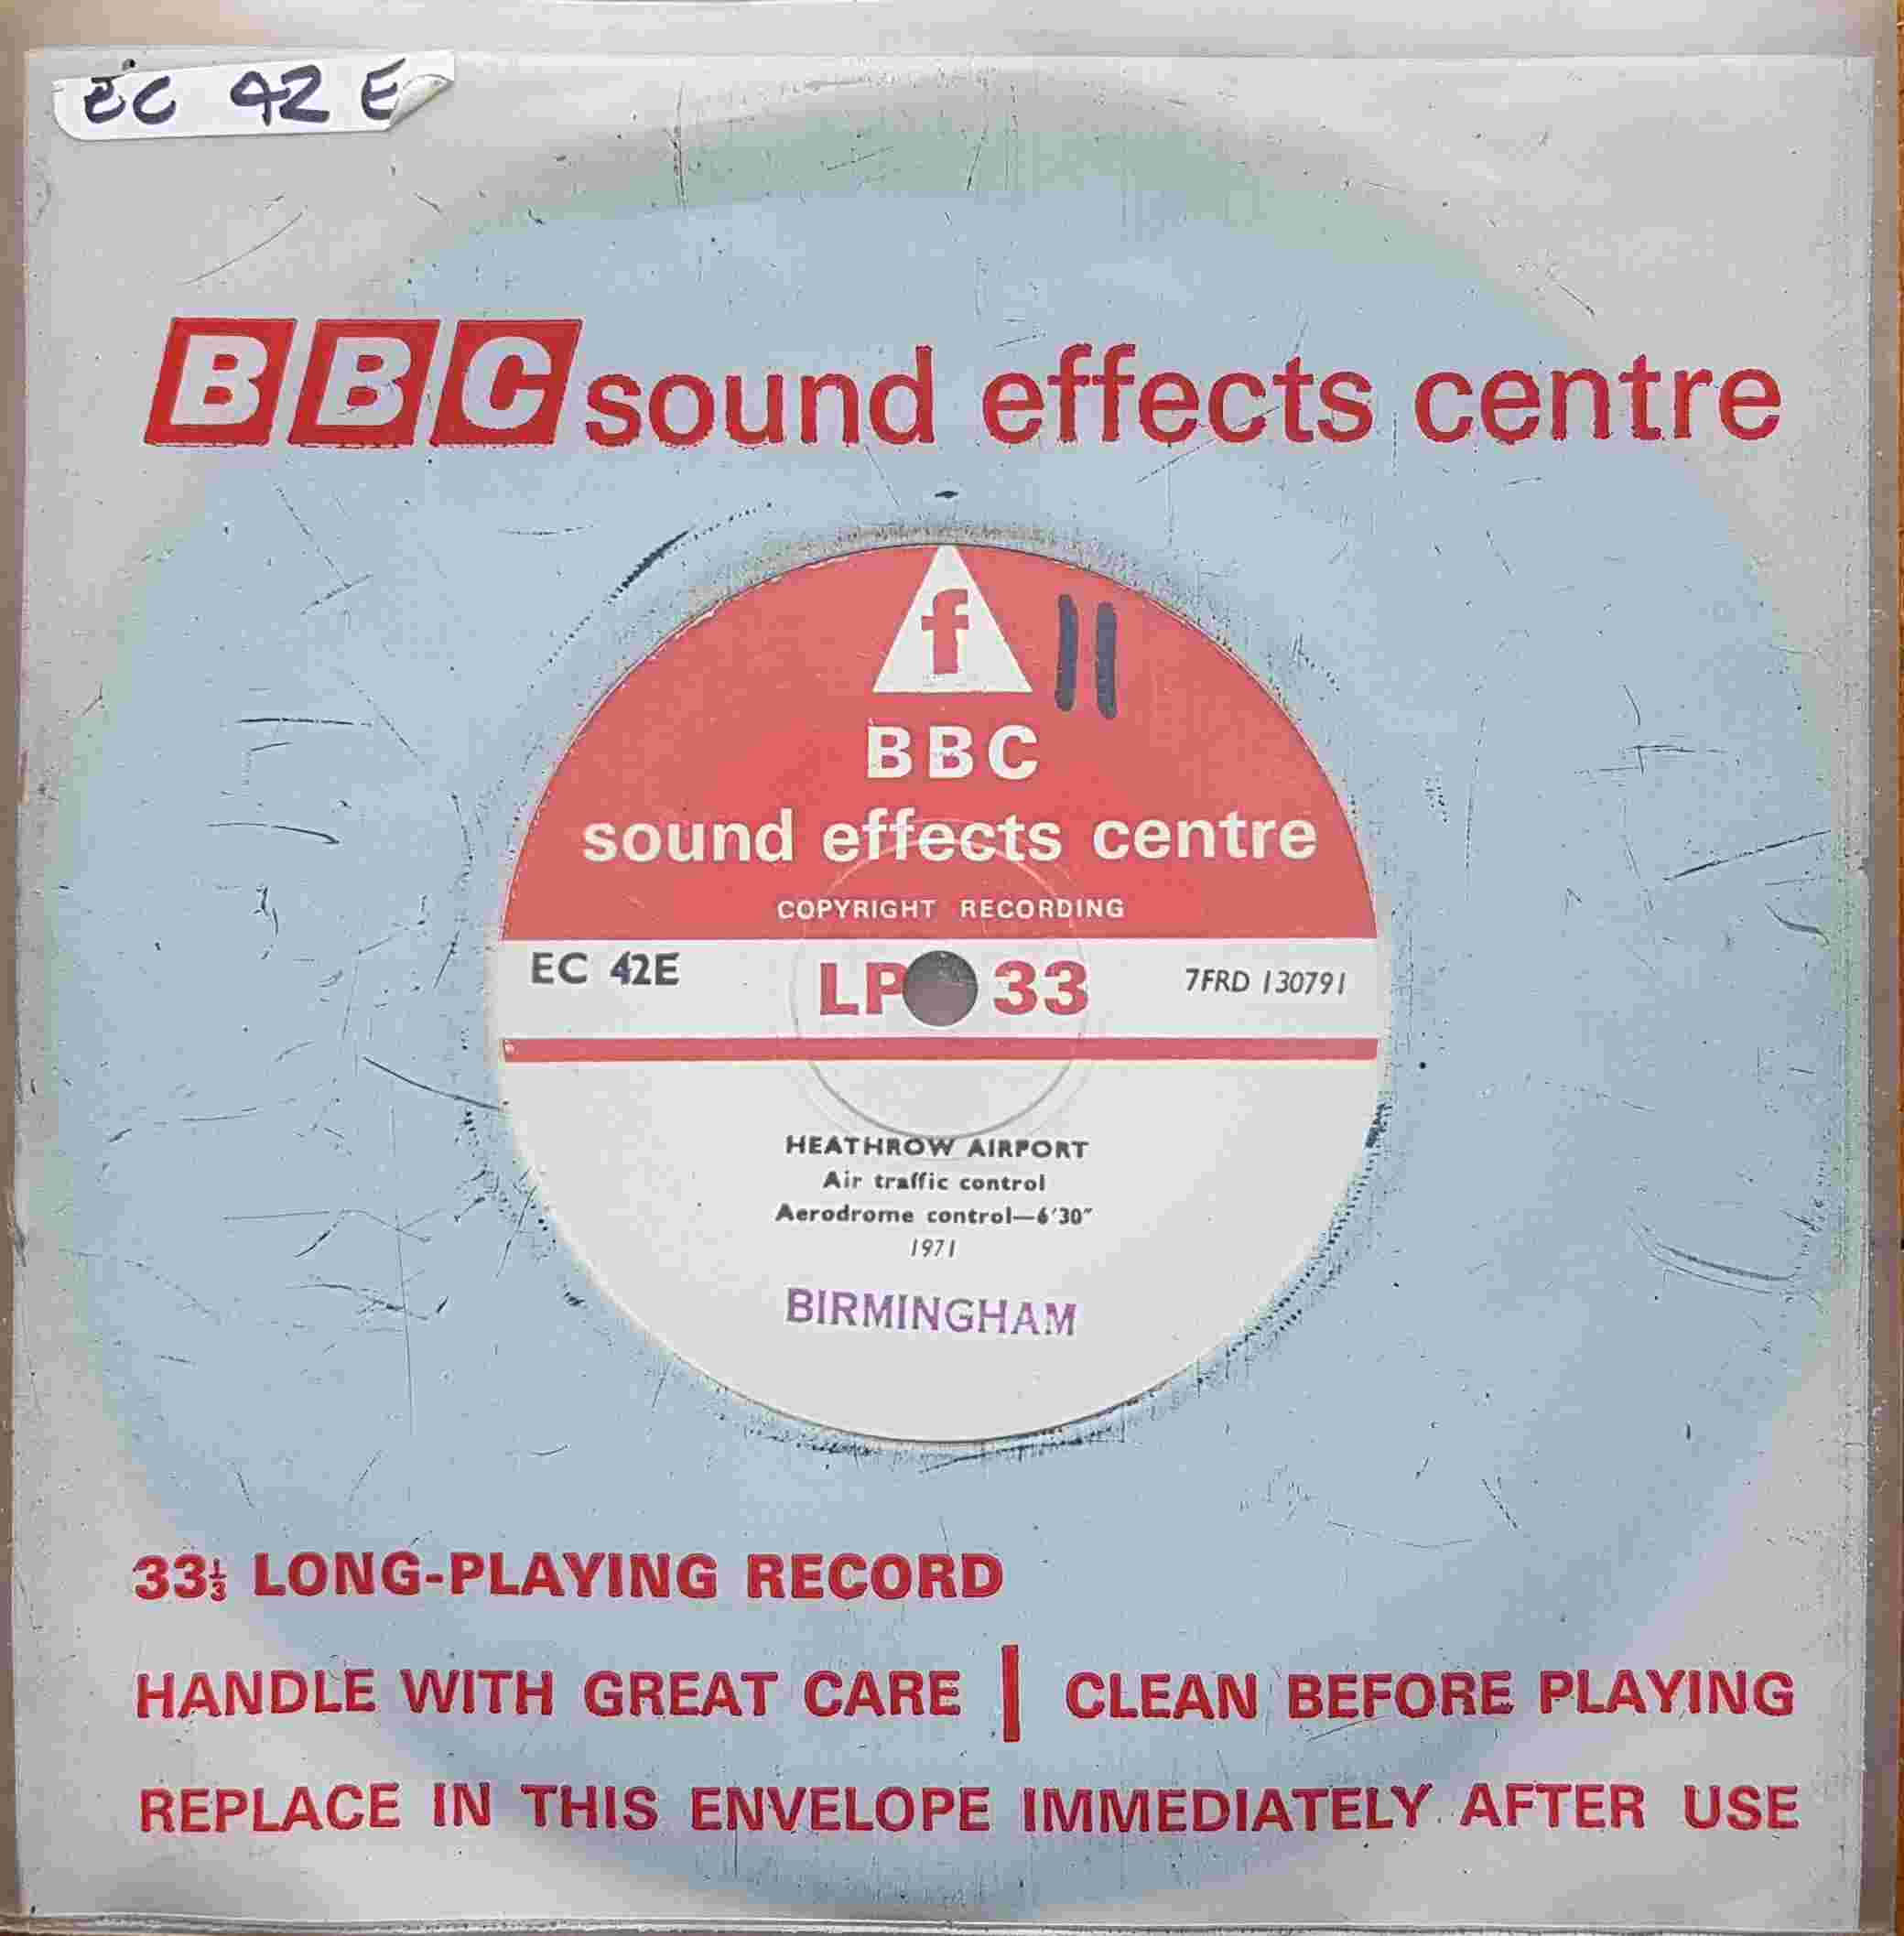 Picture of EC 42E Heathrow airport - Air traffic control 1971 by artist Not registered from the BBC singles - Records and Tapes library